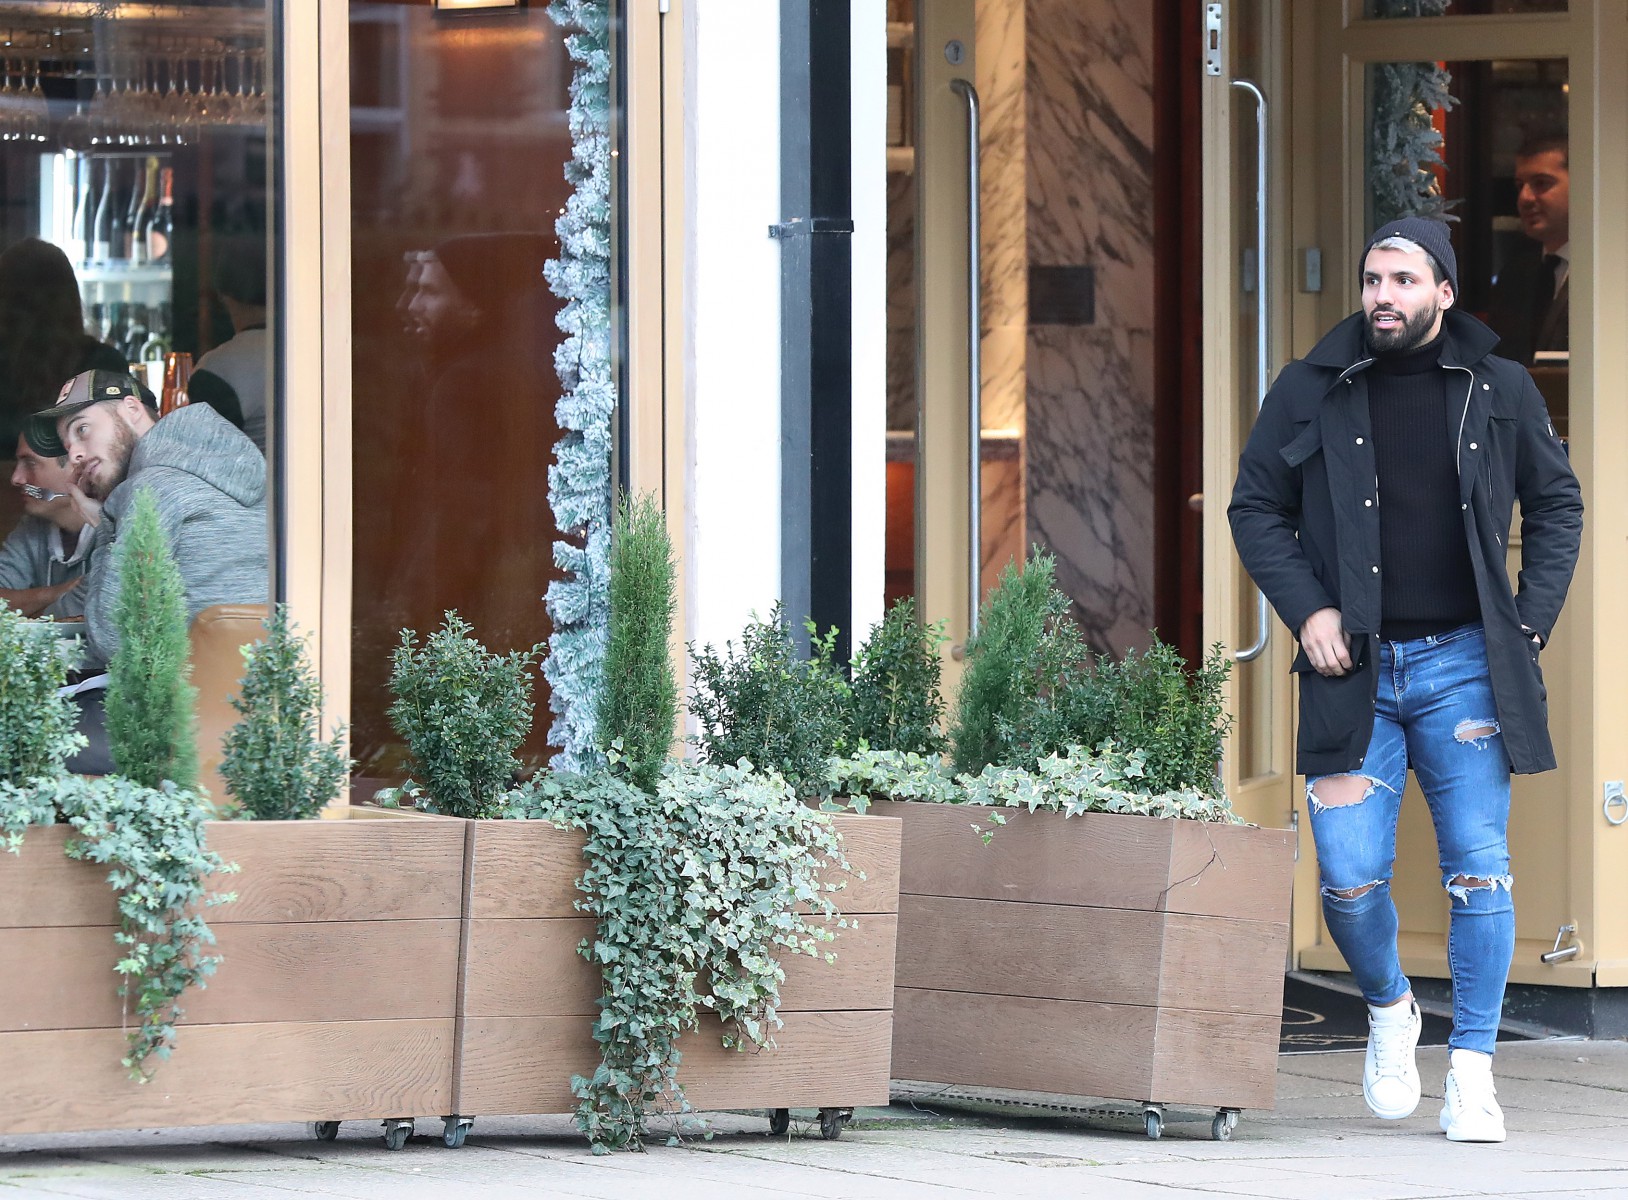 , Man Utd star De Gea jokingly stick his fingers up at Aguero after seeing City rival at Italian restaurant in Hale